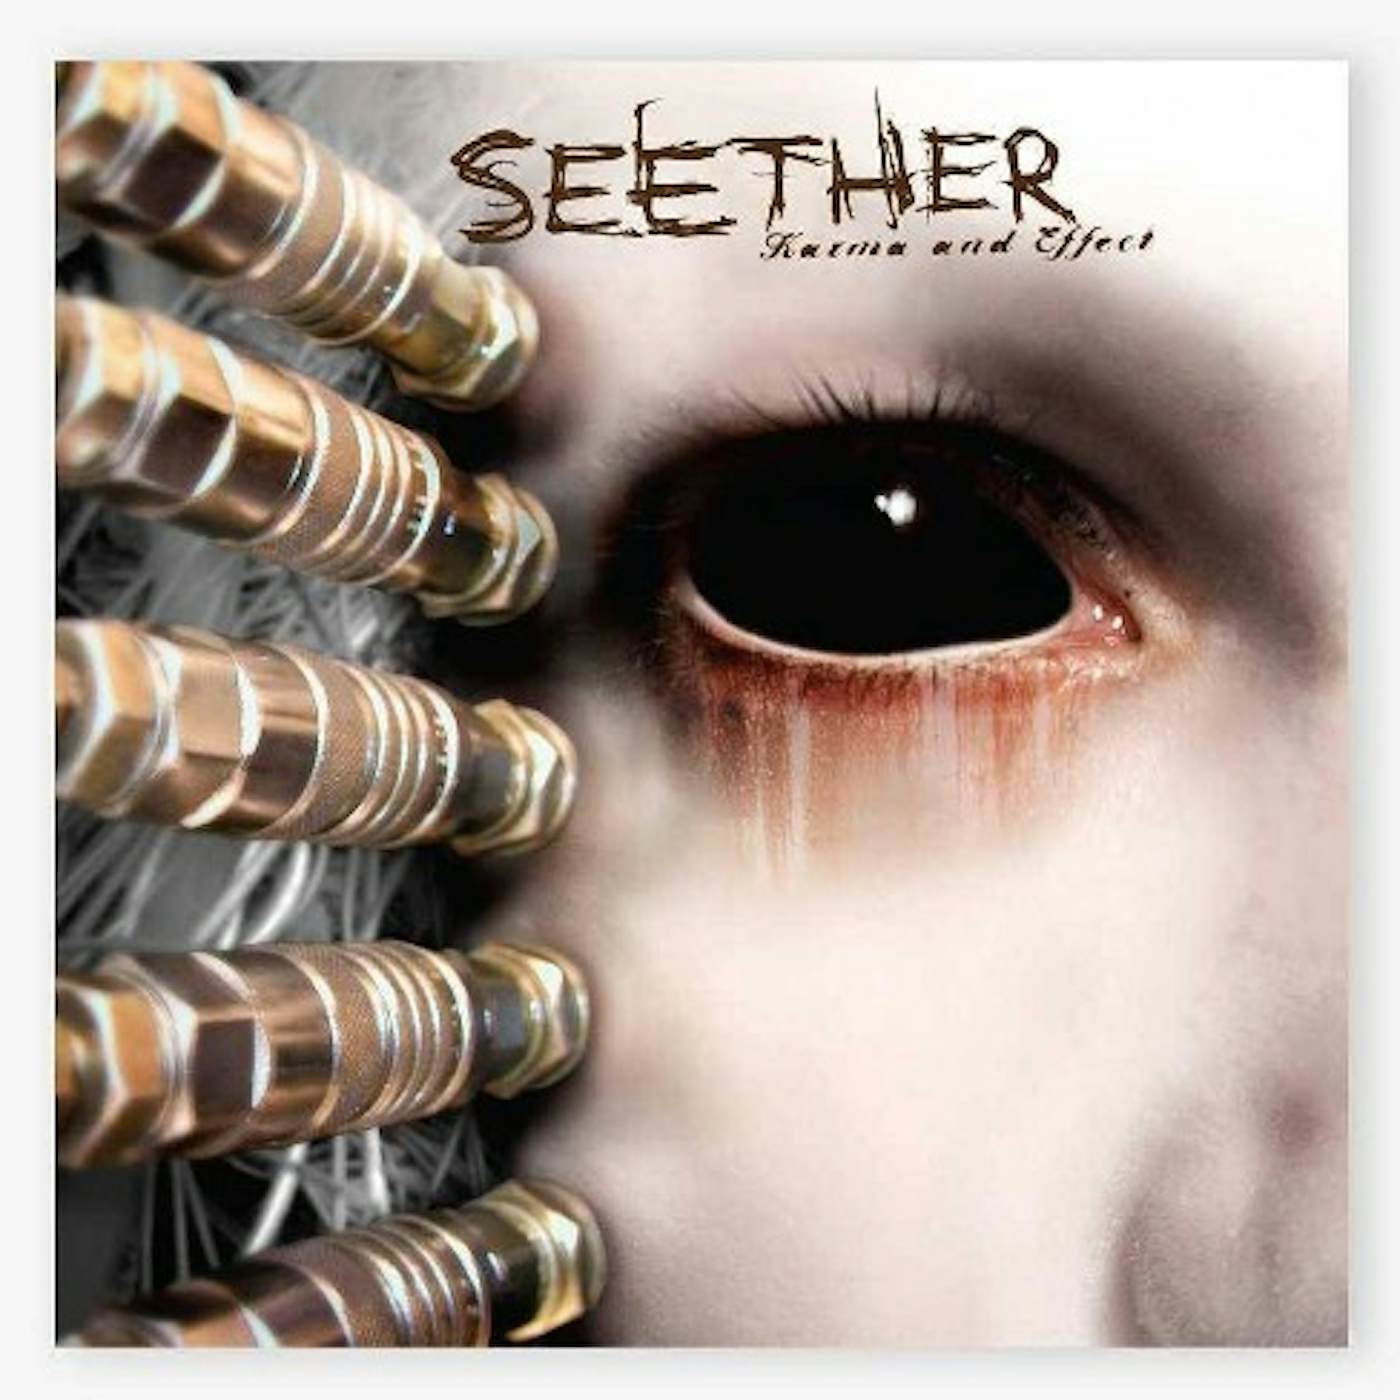 Seether Karma and Effect Vinyl Record